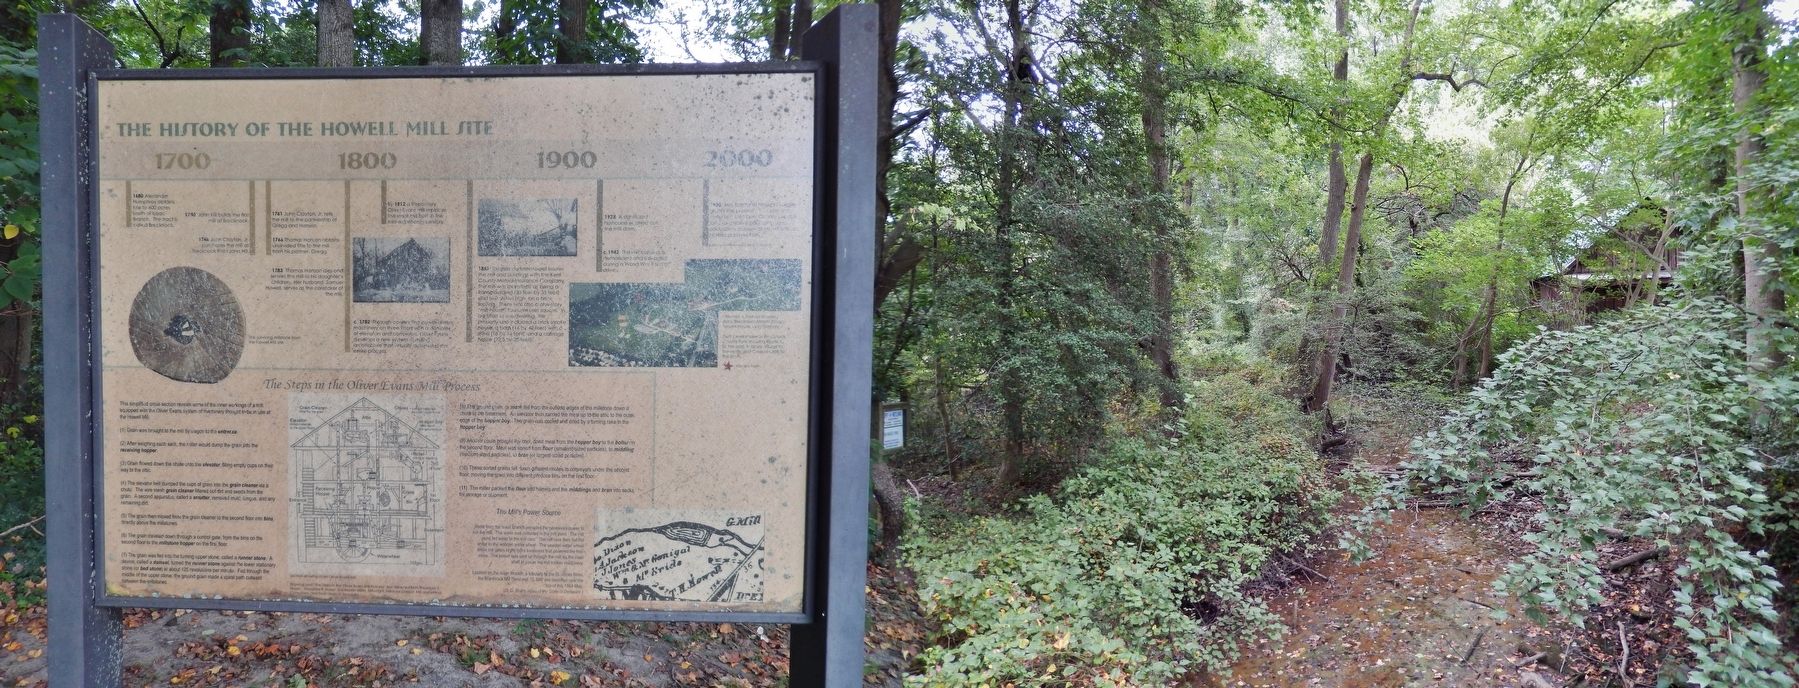 History of the Howell Mill Site Marker<br>(<i>wide view; mill site in background</i>) image. Click for full size.